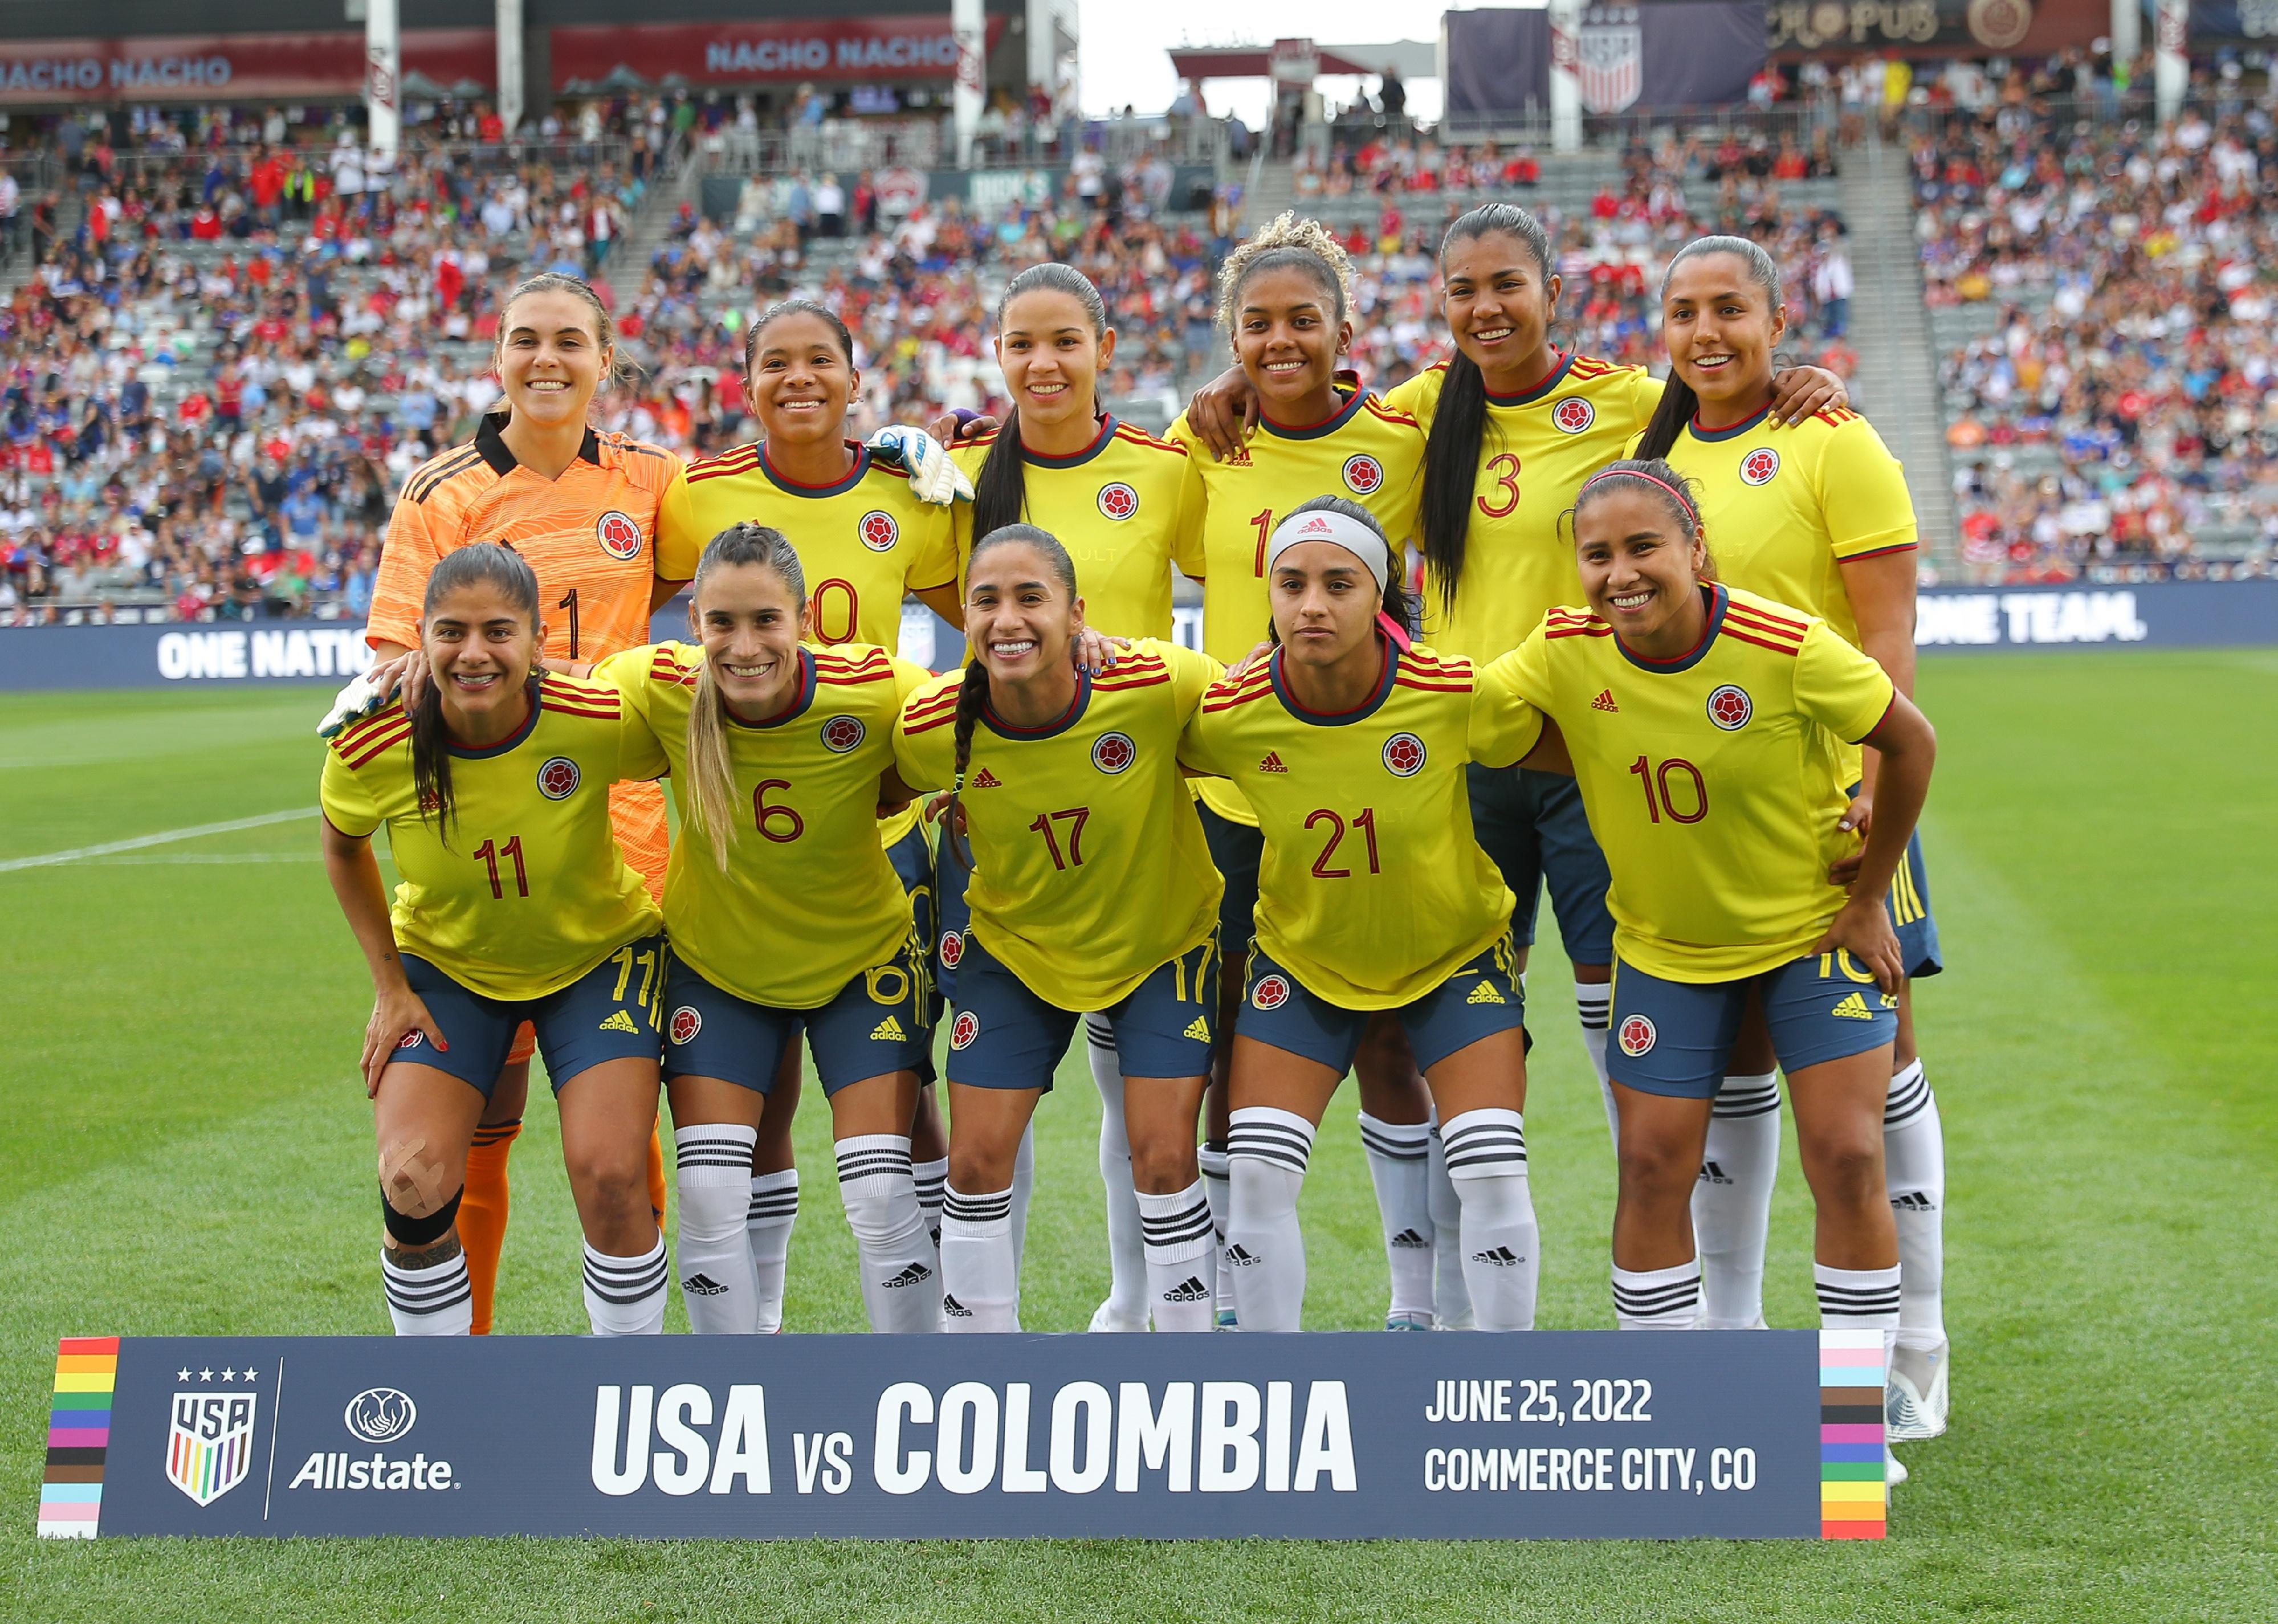 Colombia National Soccer Team pose for picture before the friendly game between Colombia and United States.